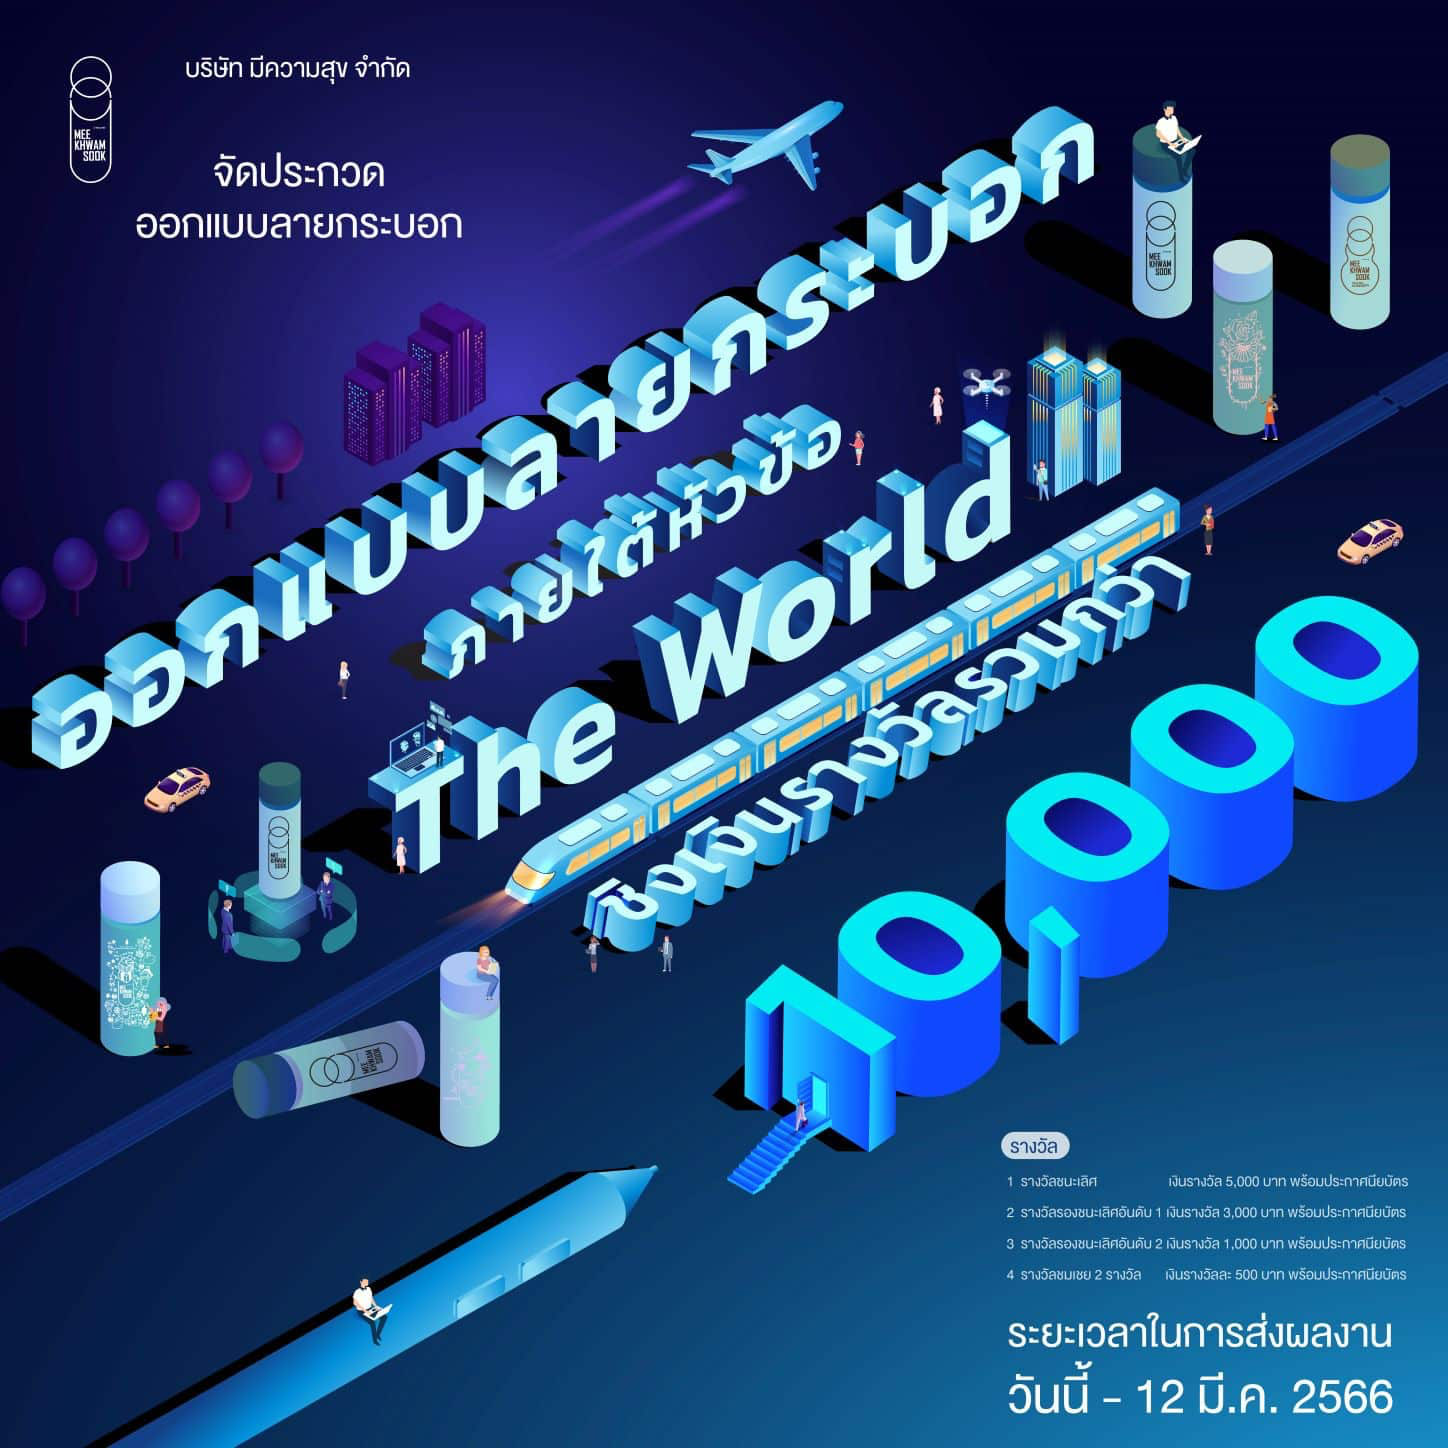 Meekhwamsook Company Limited – design contest  “The World”